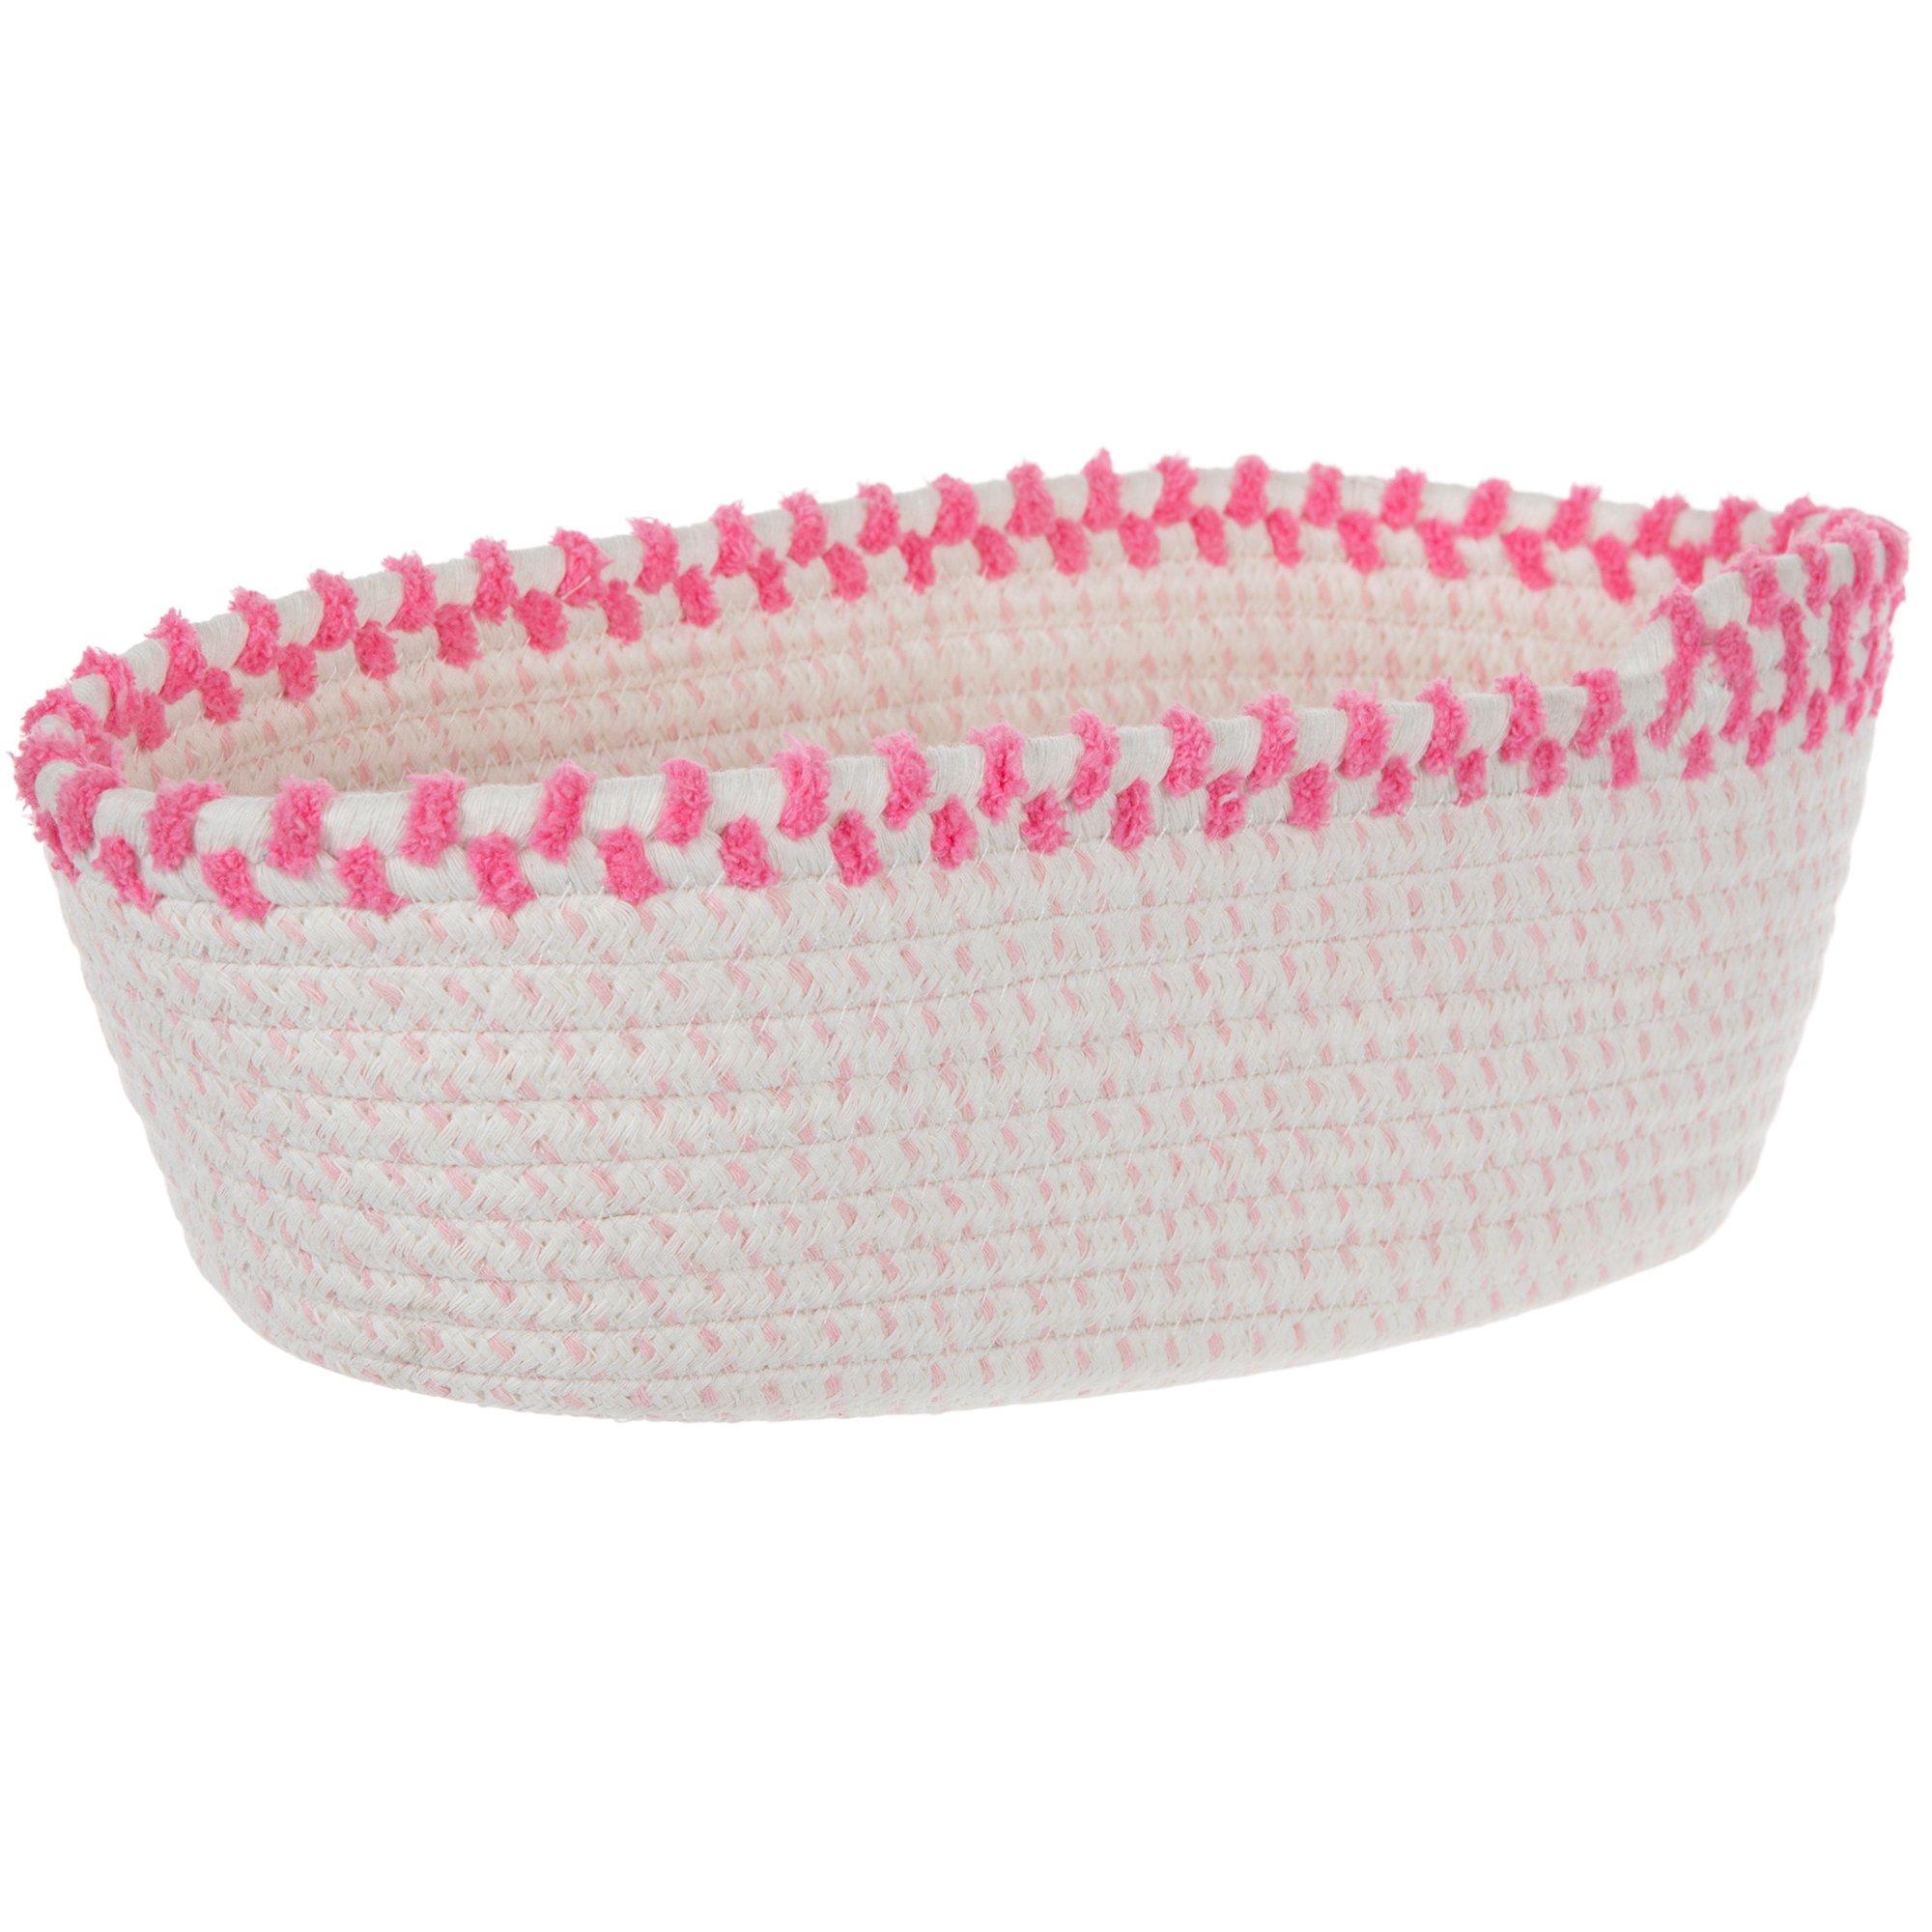 Deep pink basket weave print with elastic band pen holders for a plann –  MKDCreations